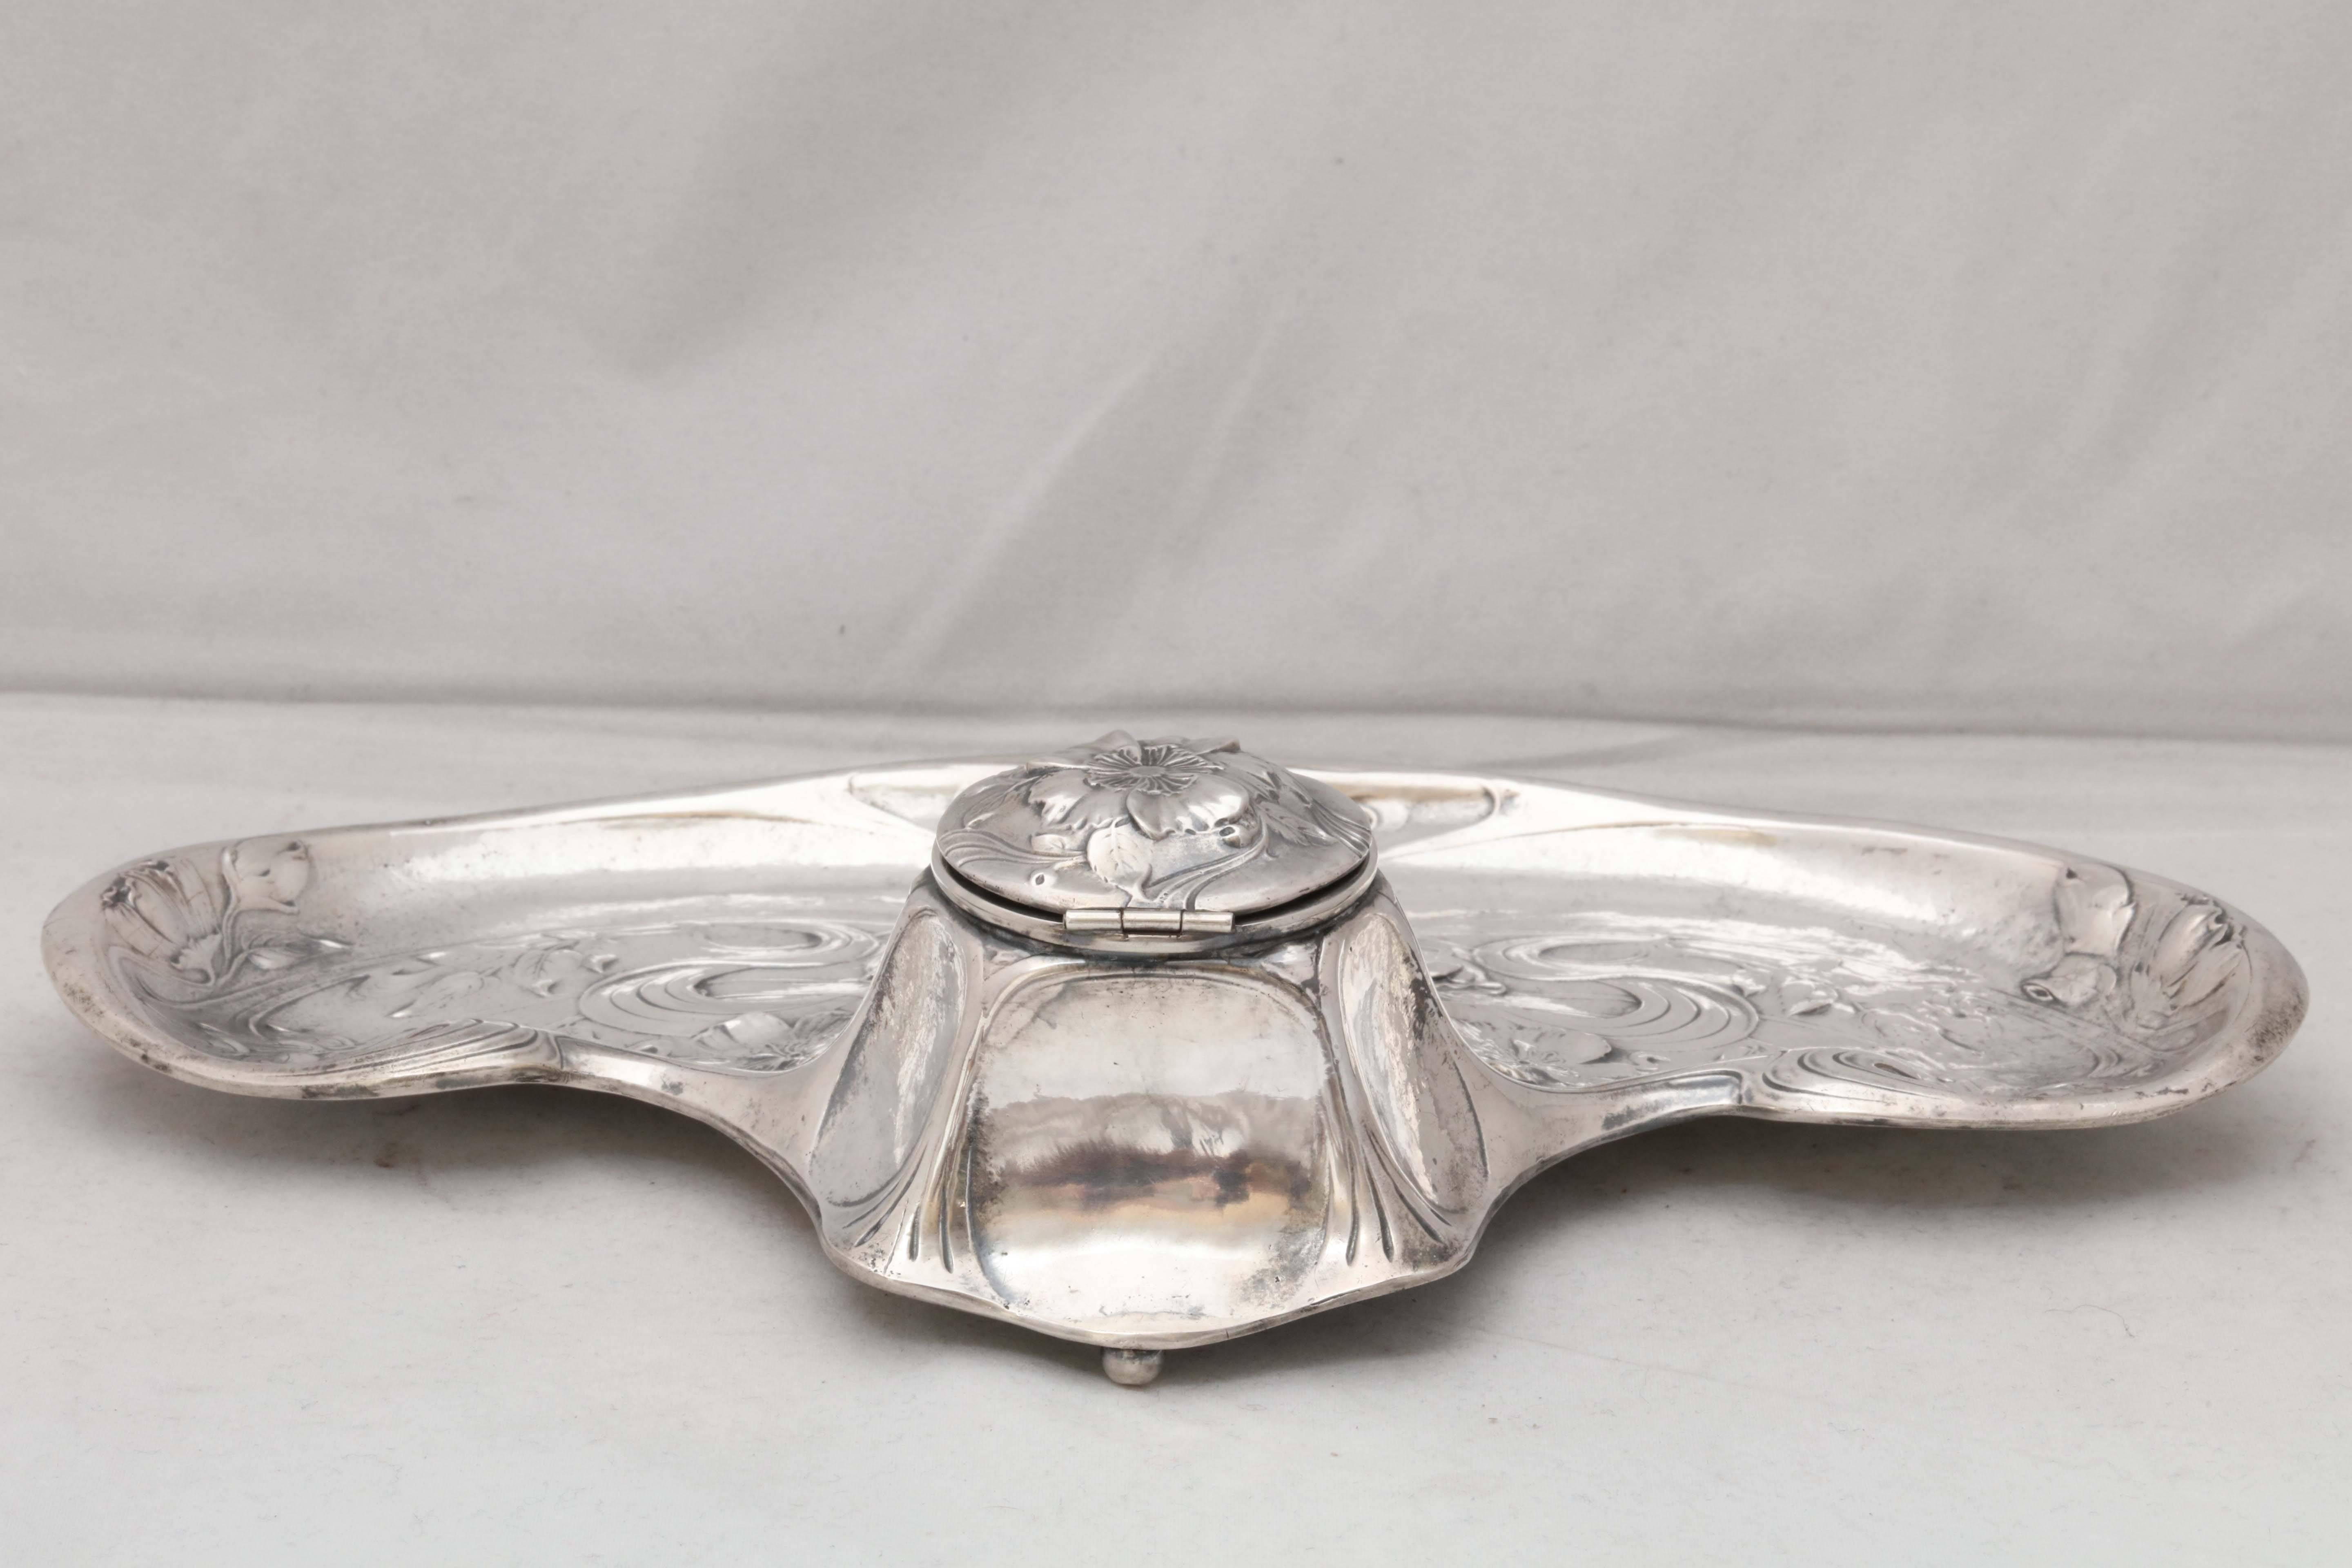 Rare Sterling Silver Art Nouveau Gorham Martele Footed Inkstand with Hinged Lid For Sale 2